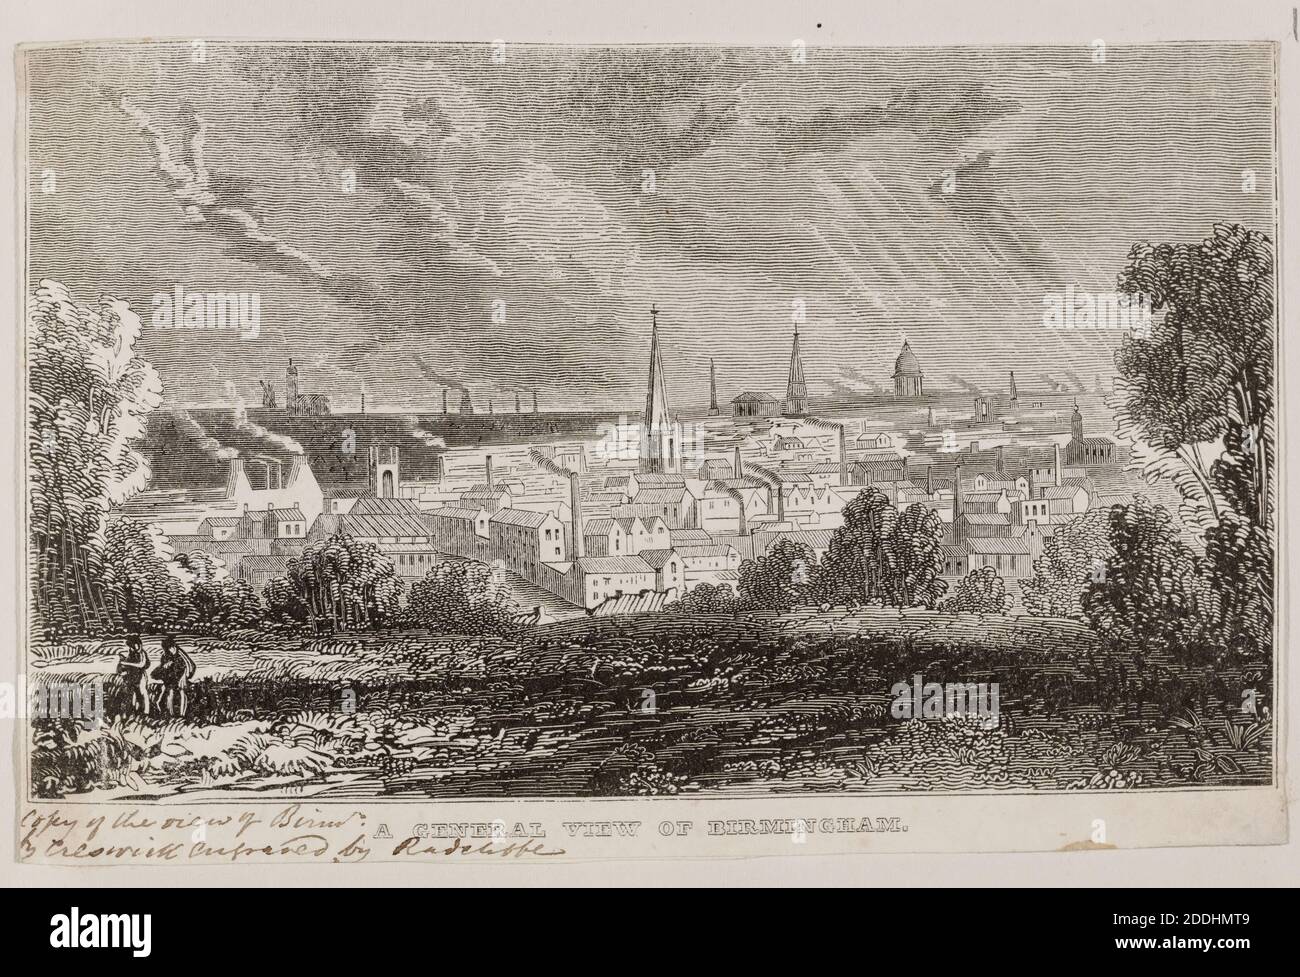 Engraving-A Central View of Birmingham From the, Vol ii, One of a collection of engravings of local views, contained in a volume. Distant view of Birmingham, showing church spires & smoking chimneys., Topographical Views, Social history, Industry, Printing, Etching, Cityscape, England, Midlands Stock Photo